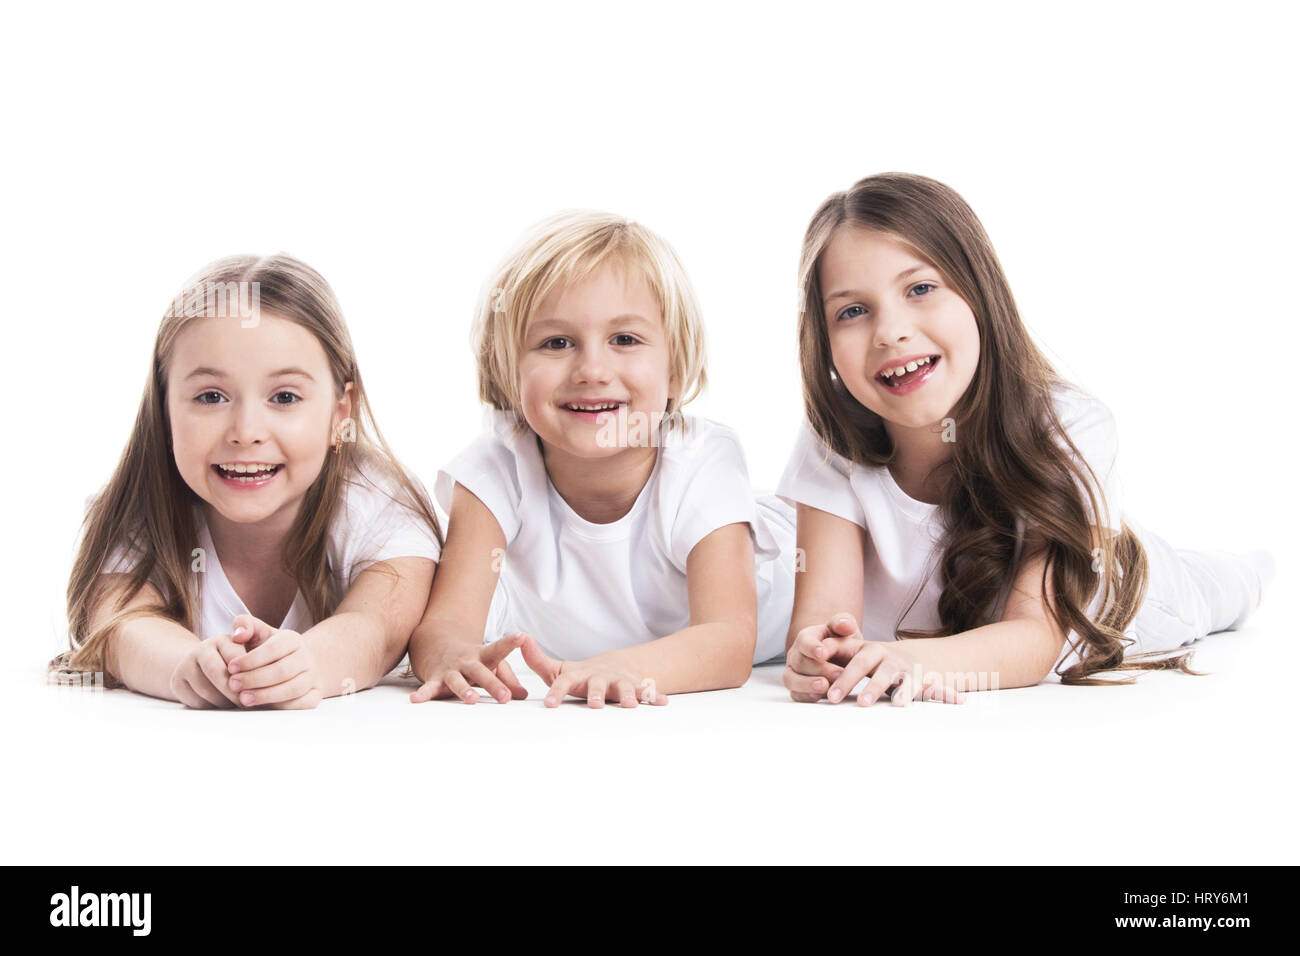 Happy smiling three children in white clothes laying on floor isolated on white background Stock Photo